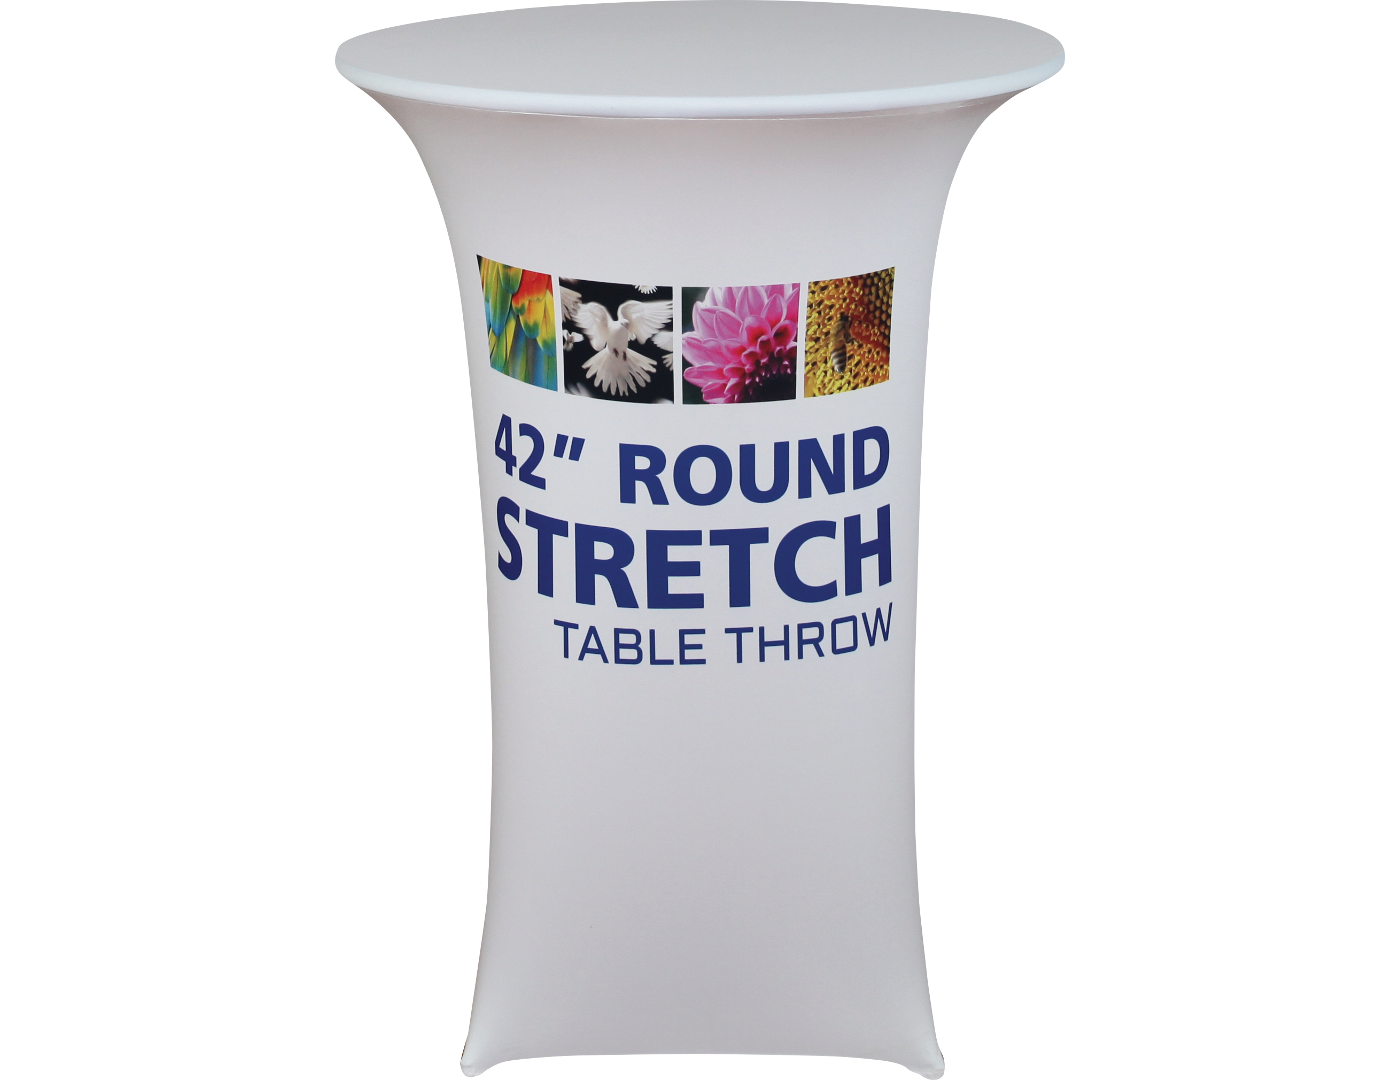 42-round-stretch-table-throw